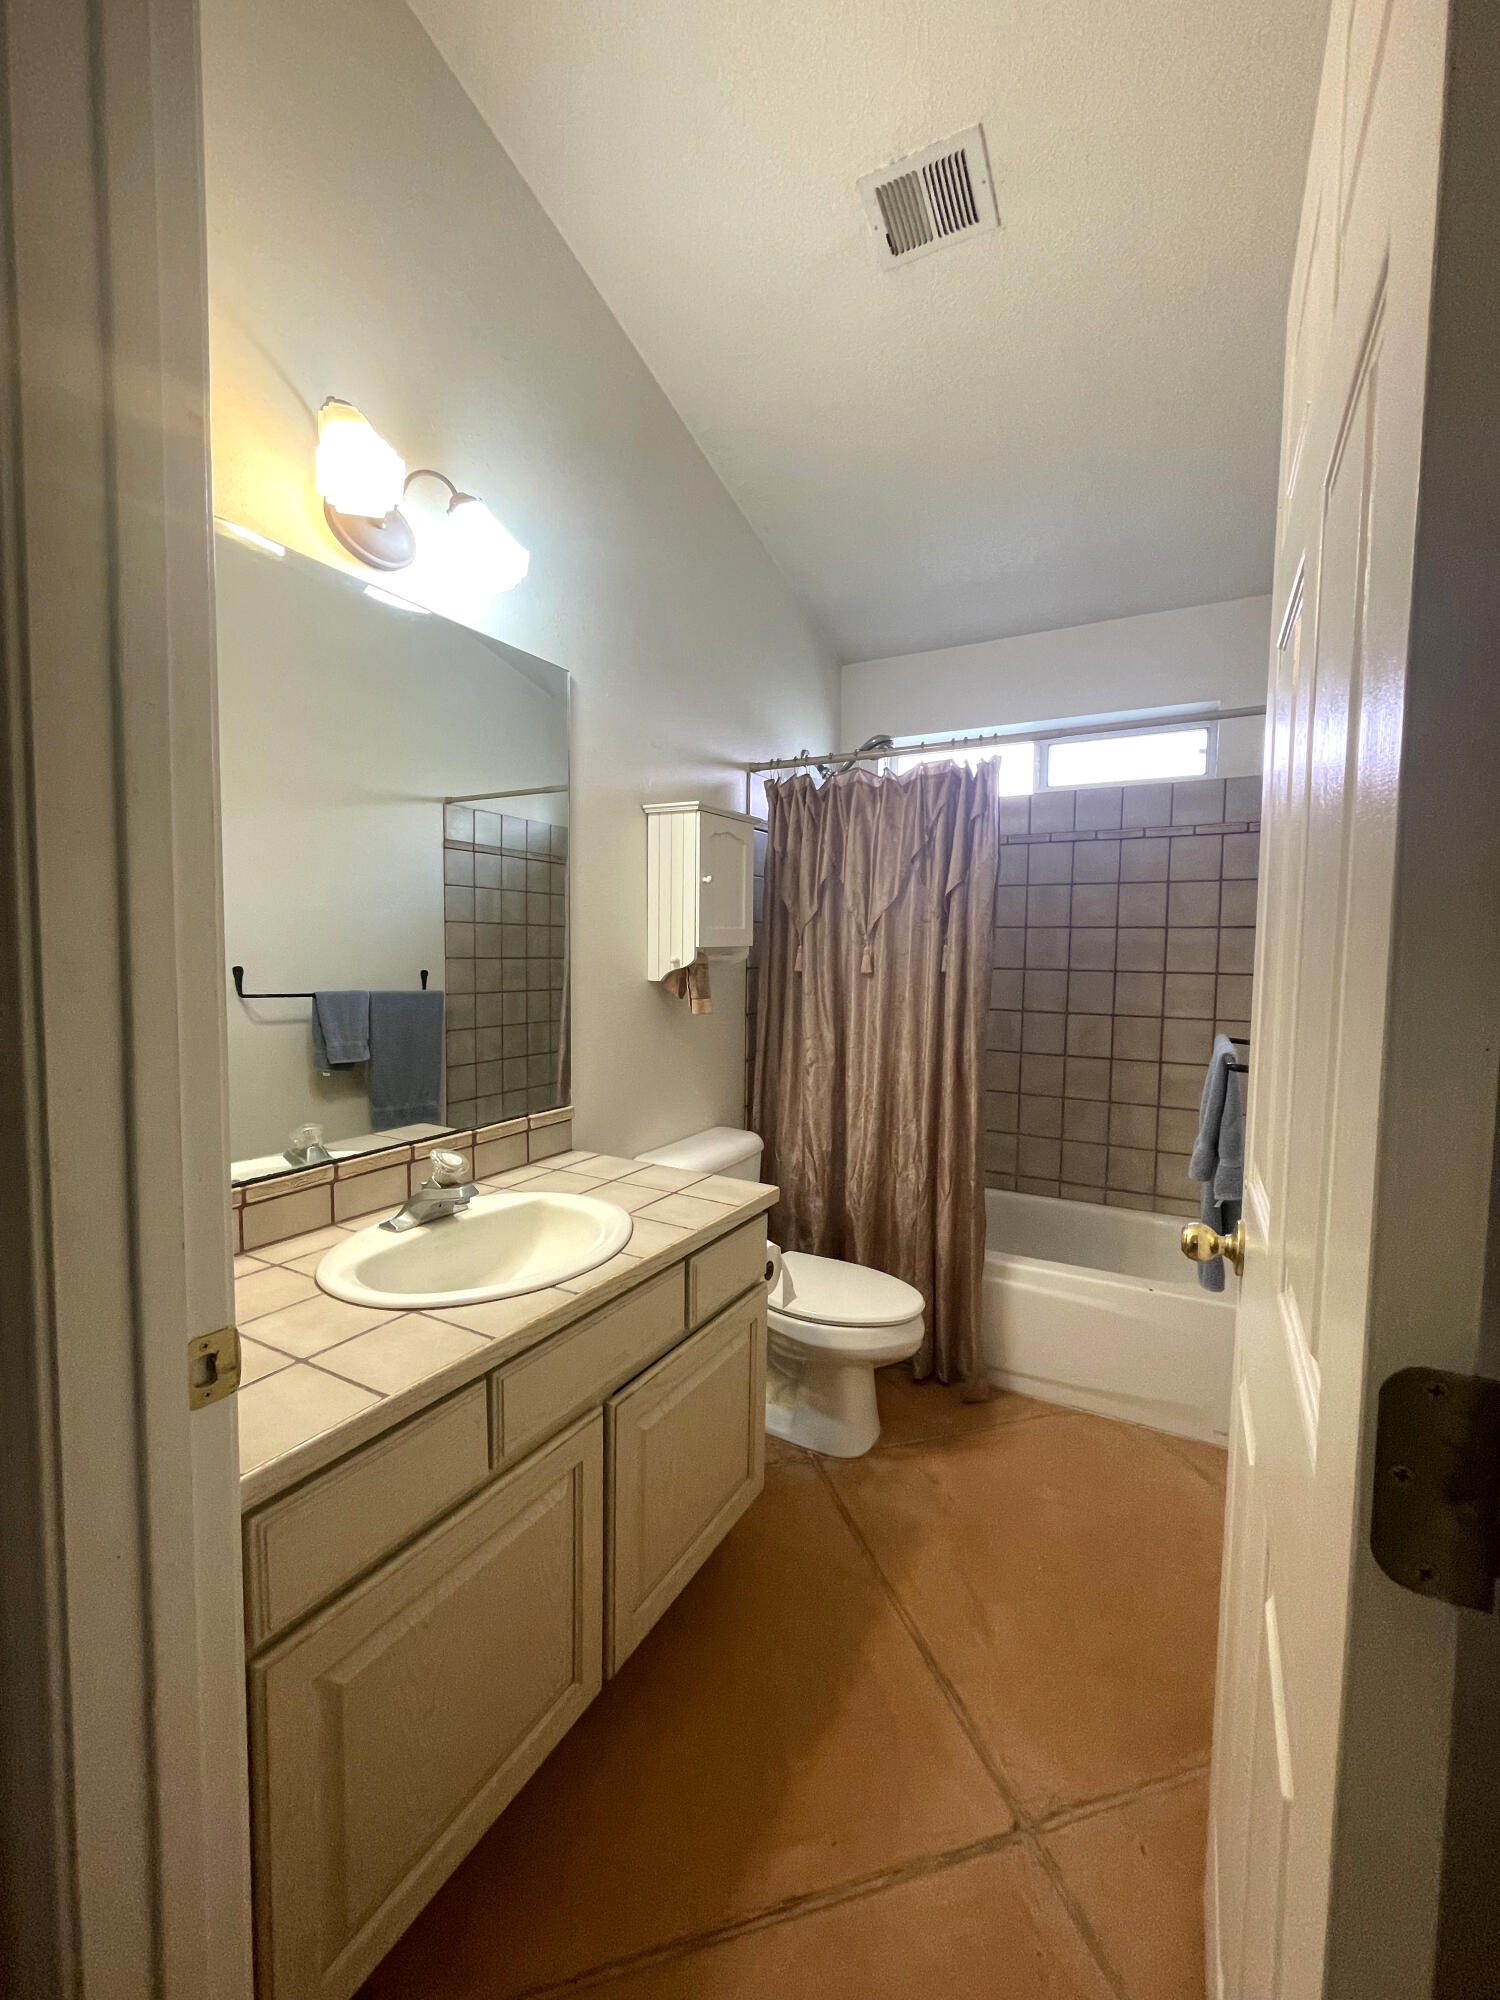 2304 Tompiro Road NW, Albuquerque, New Mexico 87120, 3 Bedrooms Bedrooms, ,2 BathroomsBathrooms,Residential,For Sale,2304 Tompiro Road NW,1061986